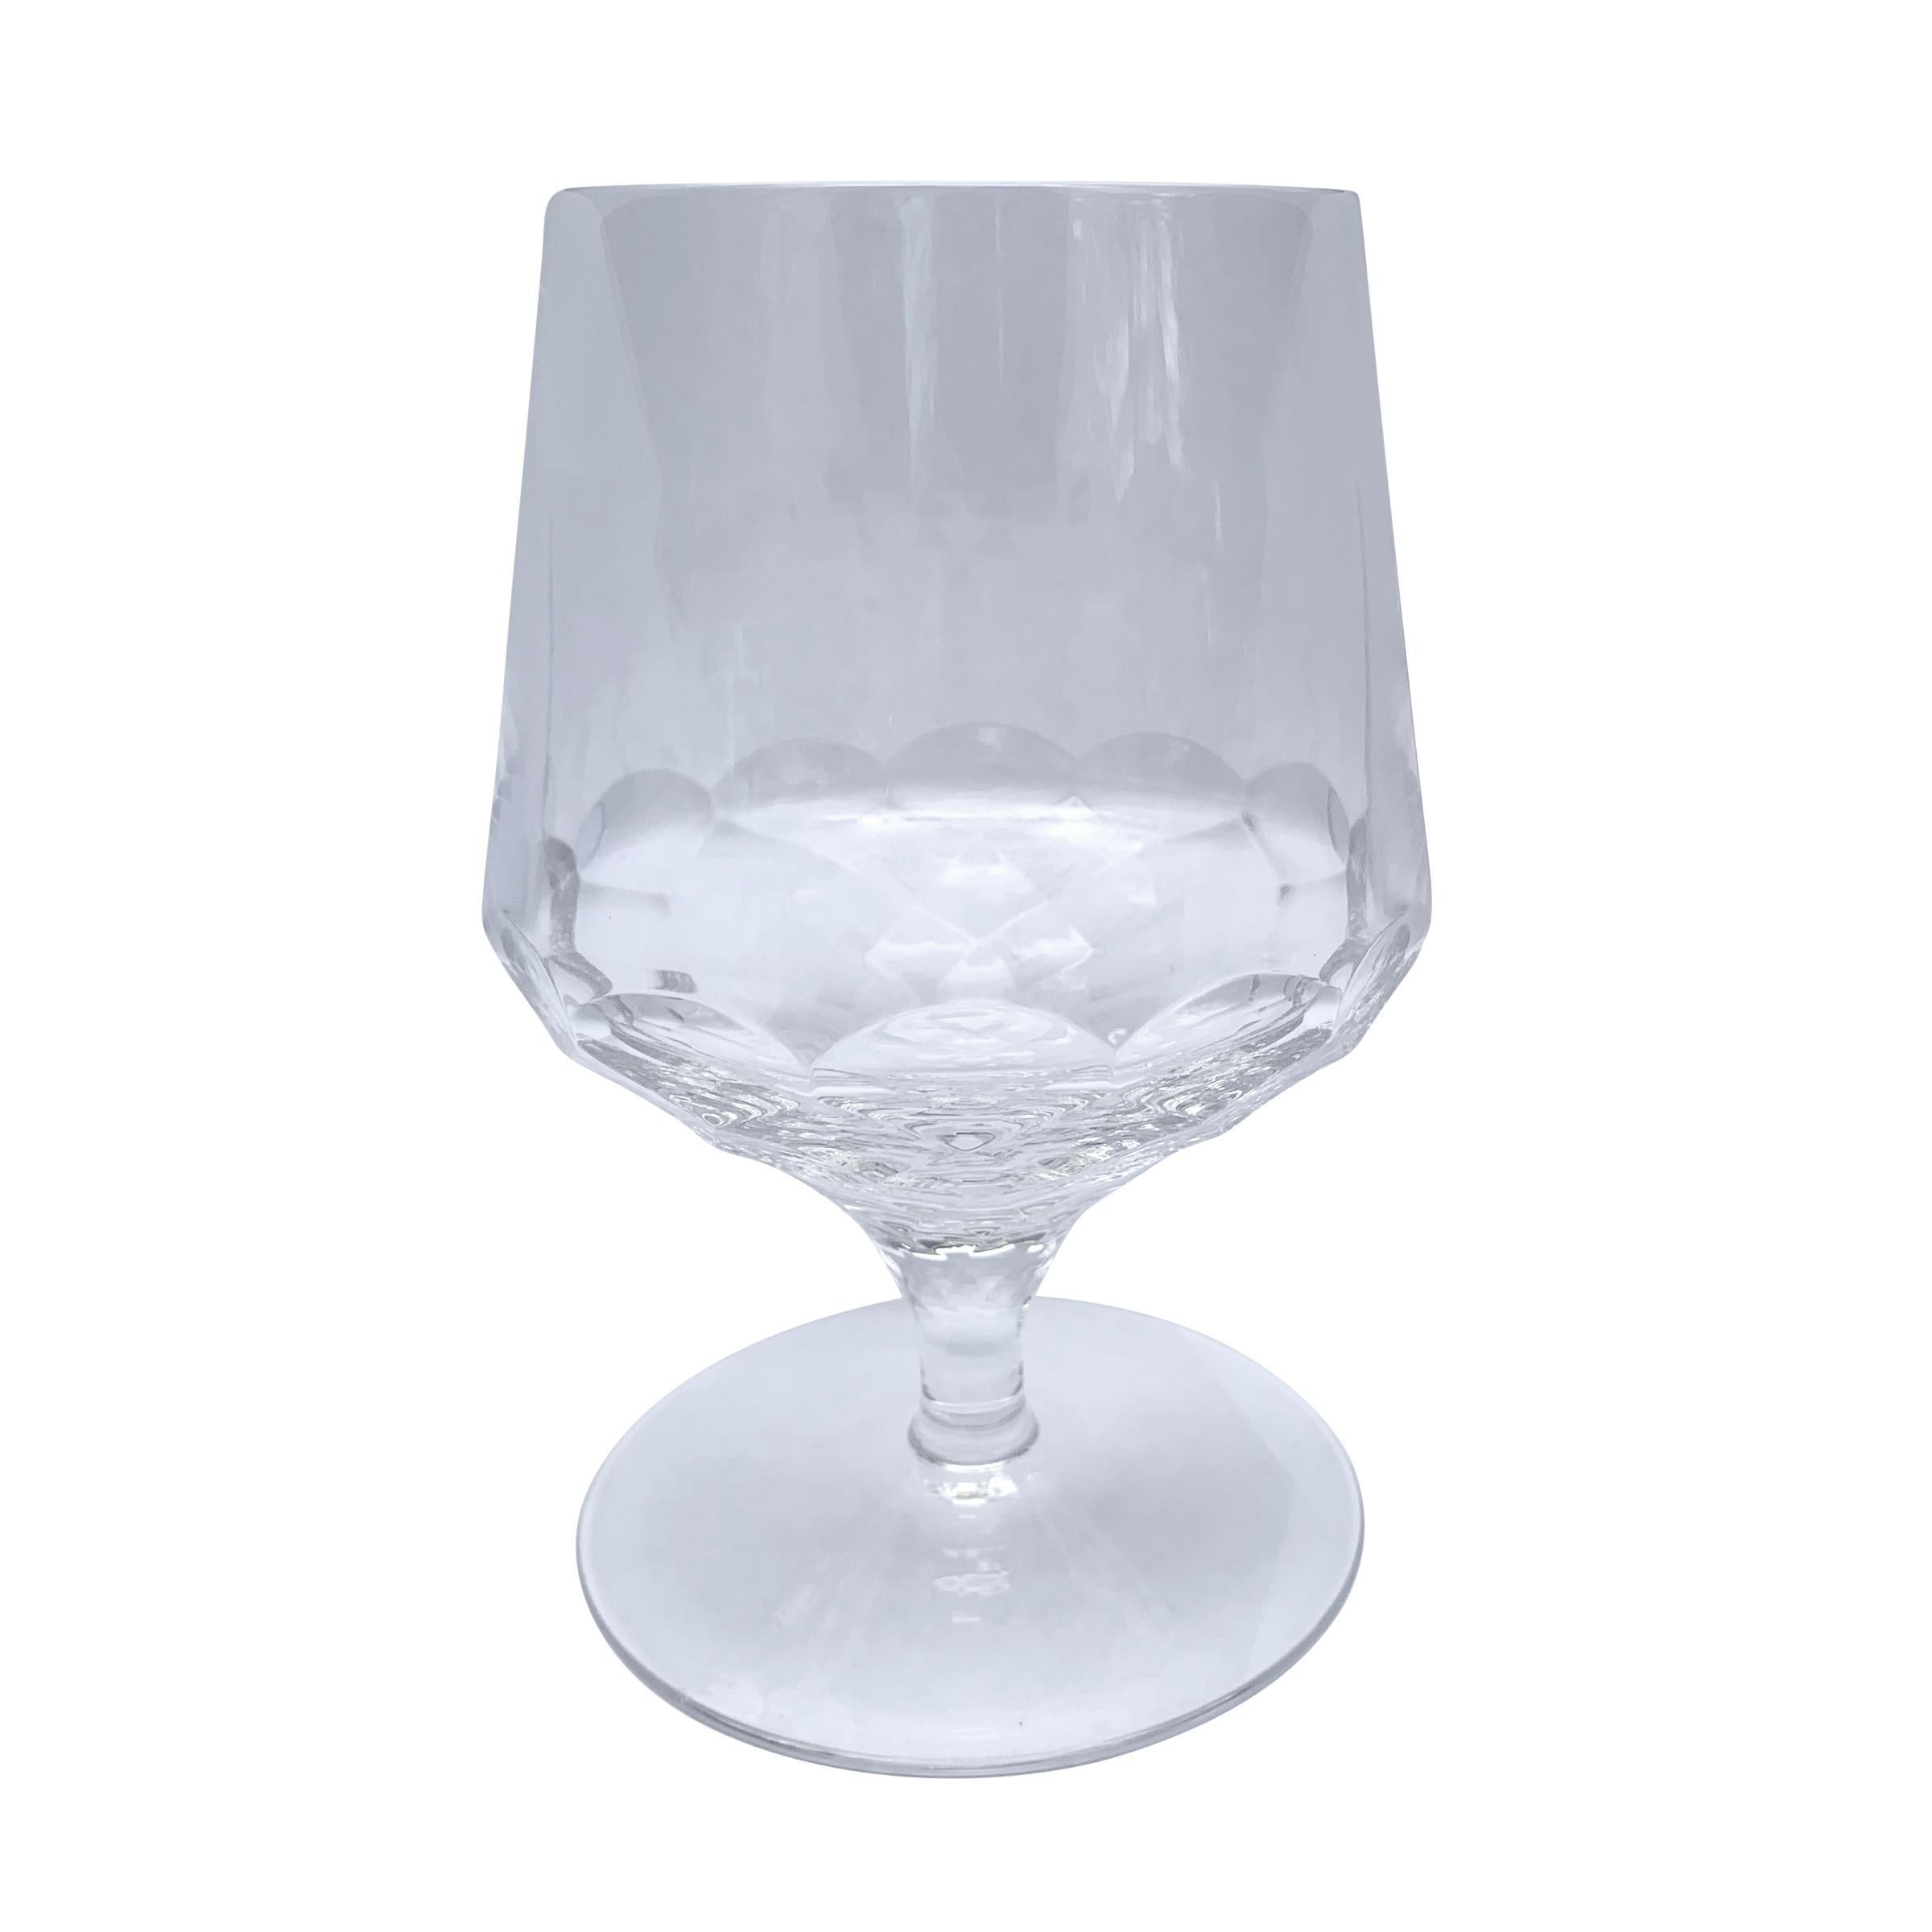 A beautiful set of eight weighty hand blown facet-cut crystal glasses inspired by 18th century Georgian patterns of similar style. Great for mixed cocktails, brandy, or whatever poison you prefer.